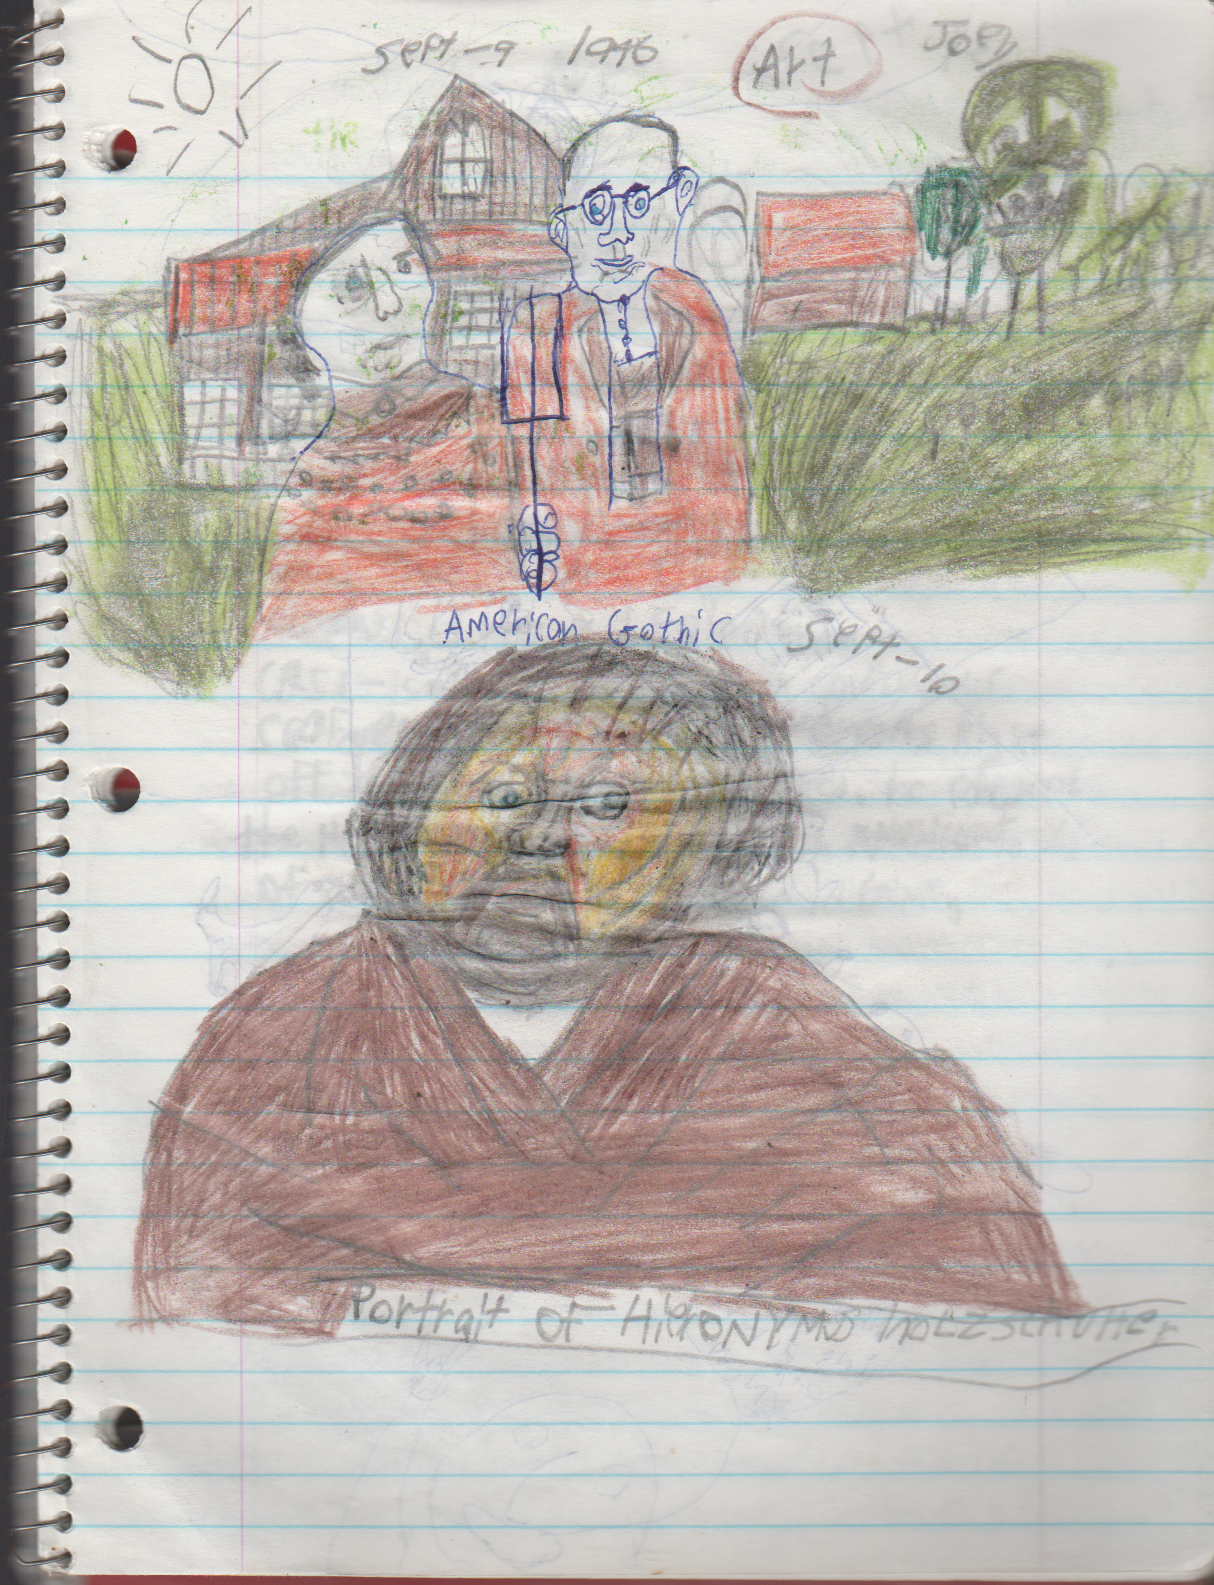 1996-08-18 - Saturday - 11 yr old Joey Arnold's School Book, dates through to 1998 apx, mostly 96, Writings, Drawings, Etc-016 ok.png